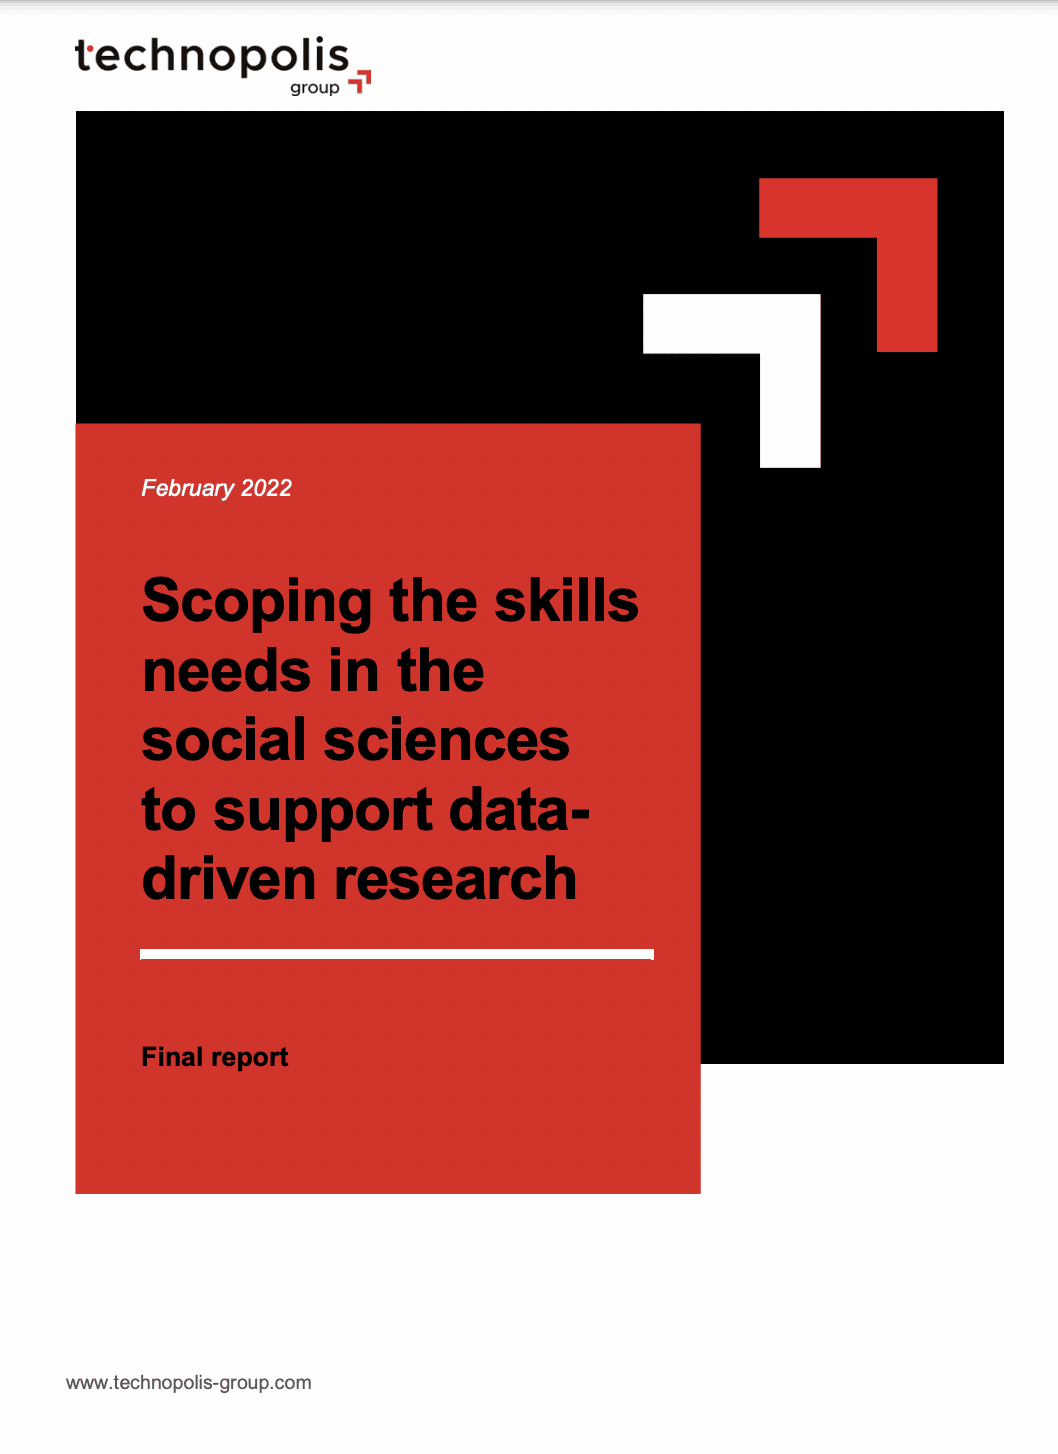 Scoping the skills needs in the social sciences to support data-driven research